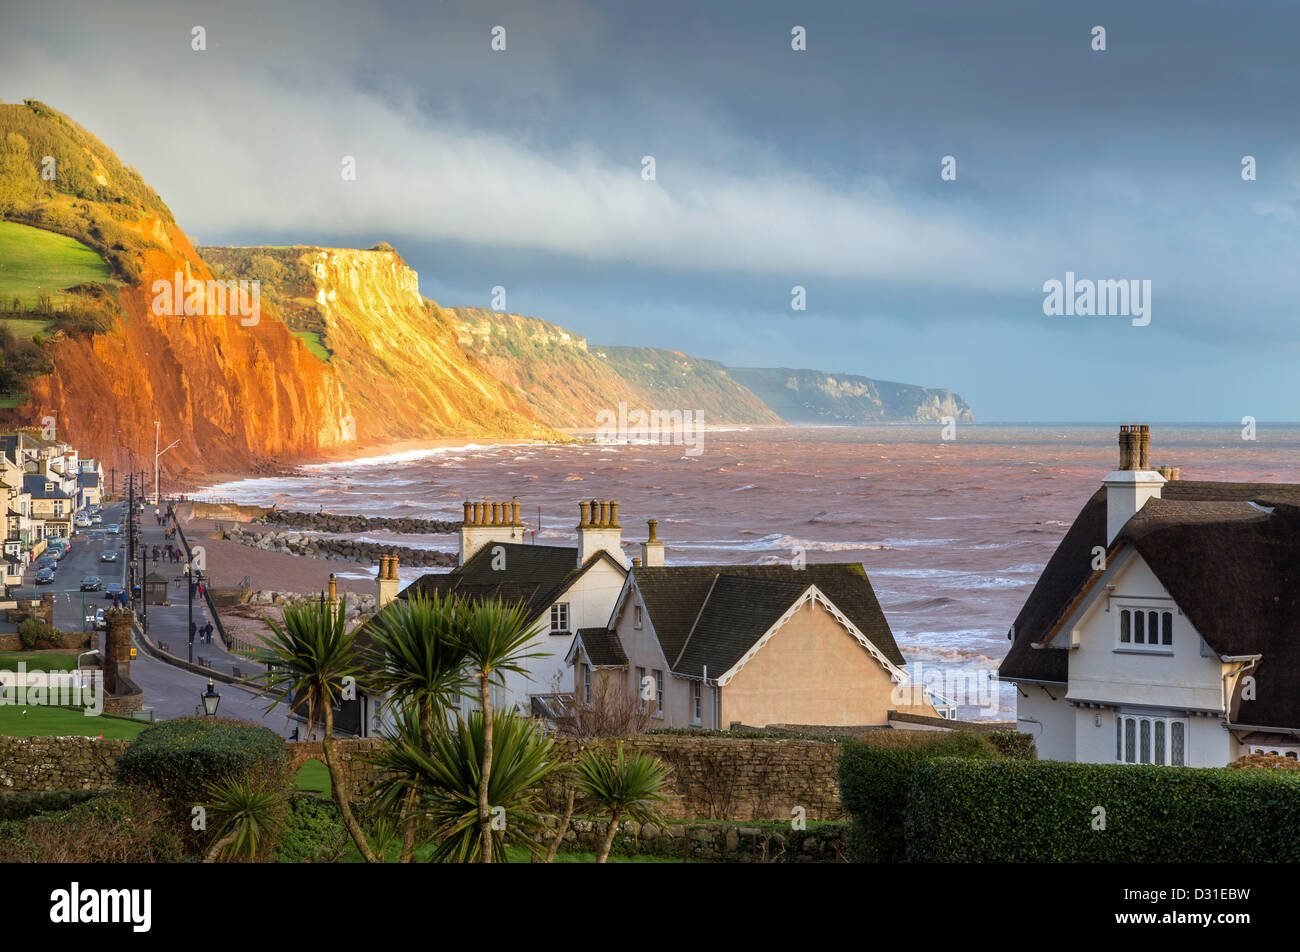 A view along the east beach at Sidmouth showing storm lighting on a recent landslide on Salcombe Hill, Devon. Stock Photo